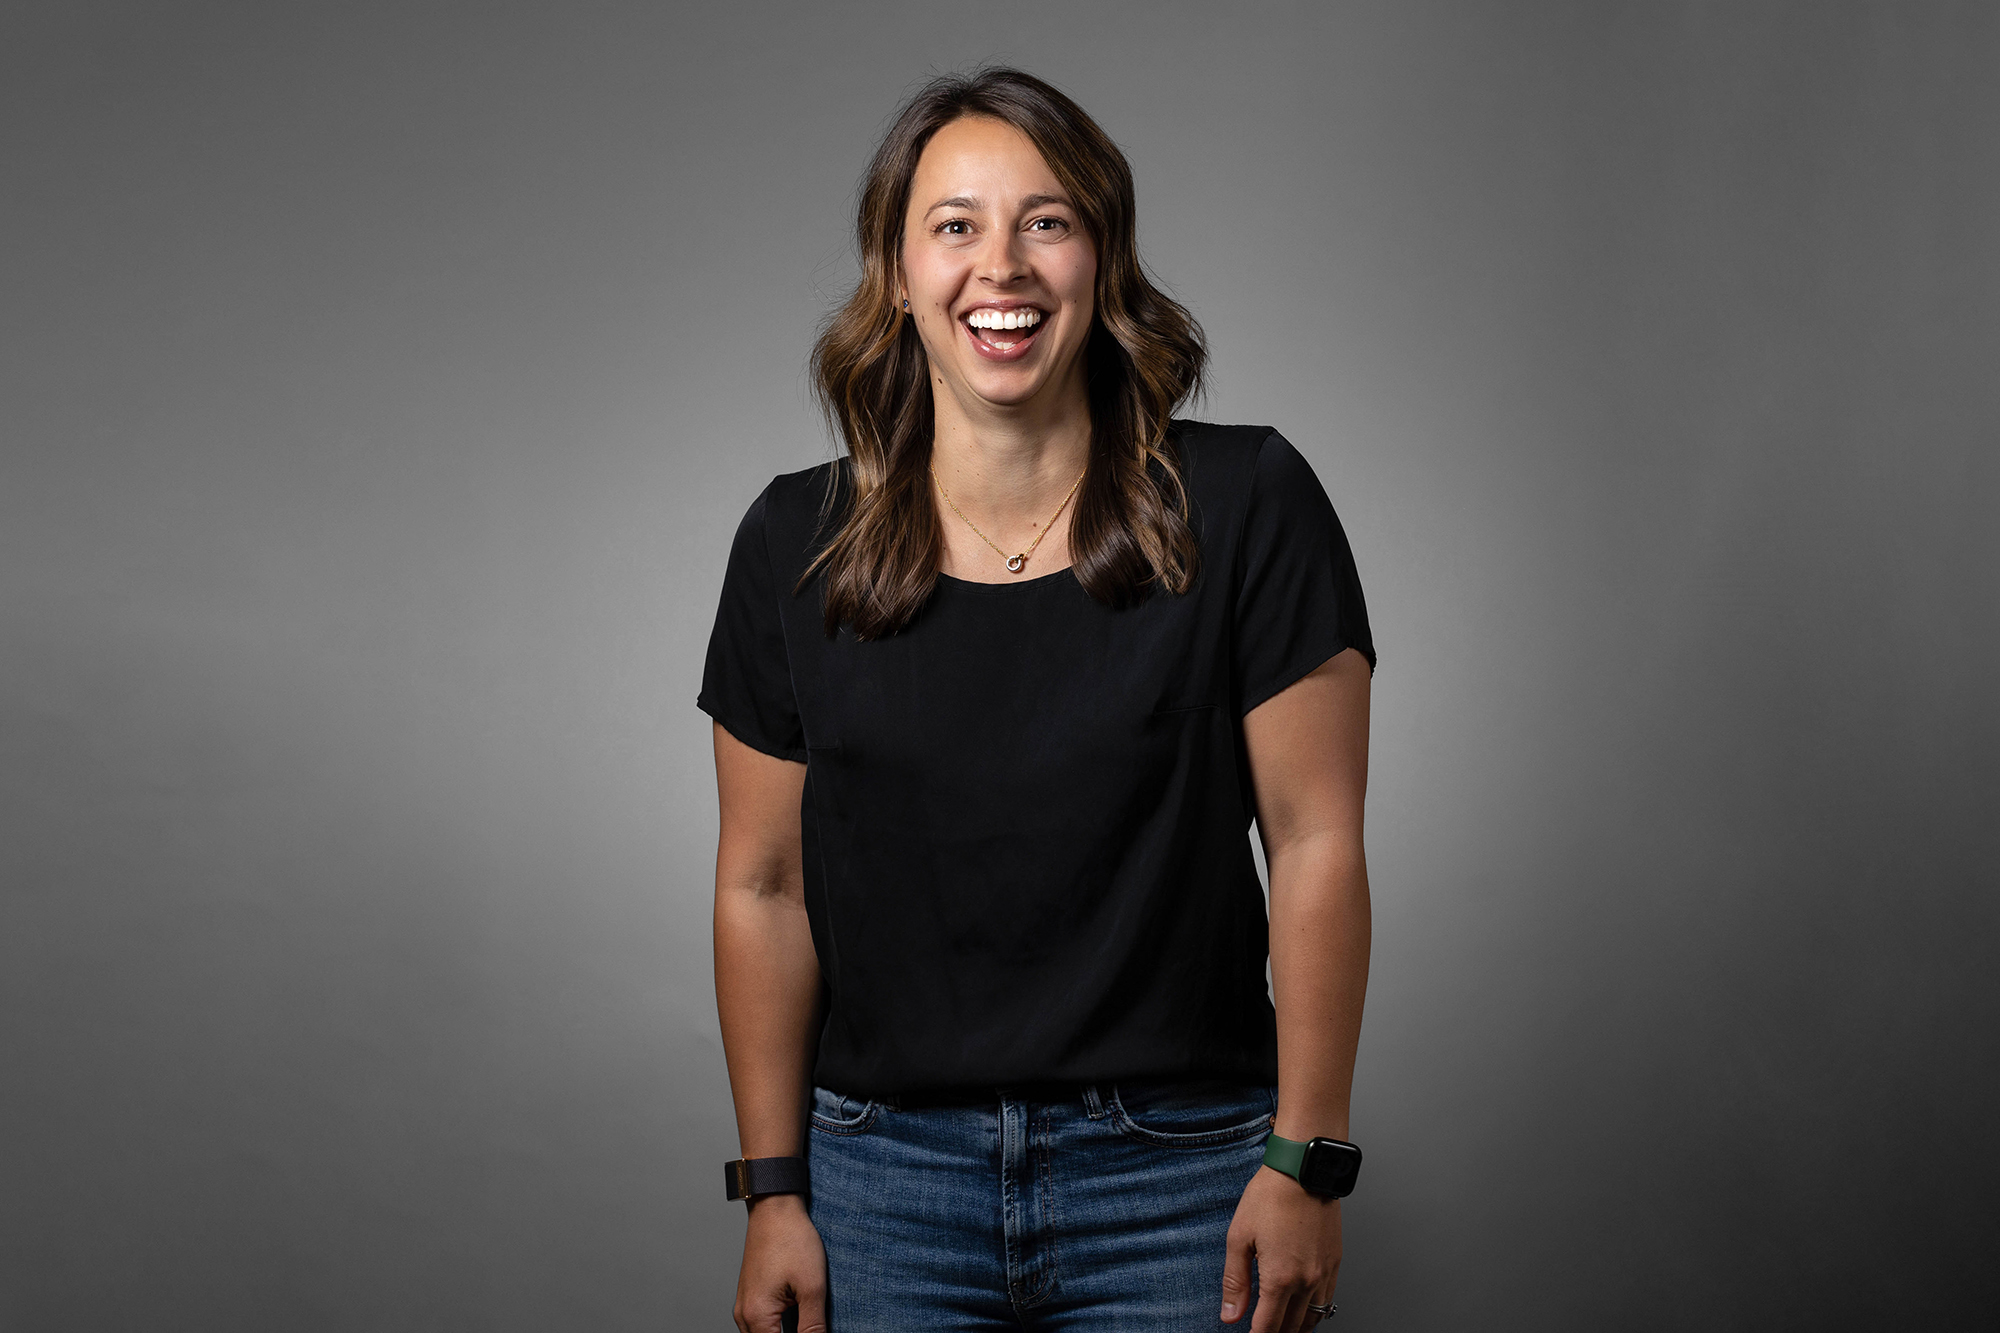 A smiling woman wearing a black shirt and jeans poses for corporate headshots.